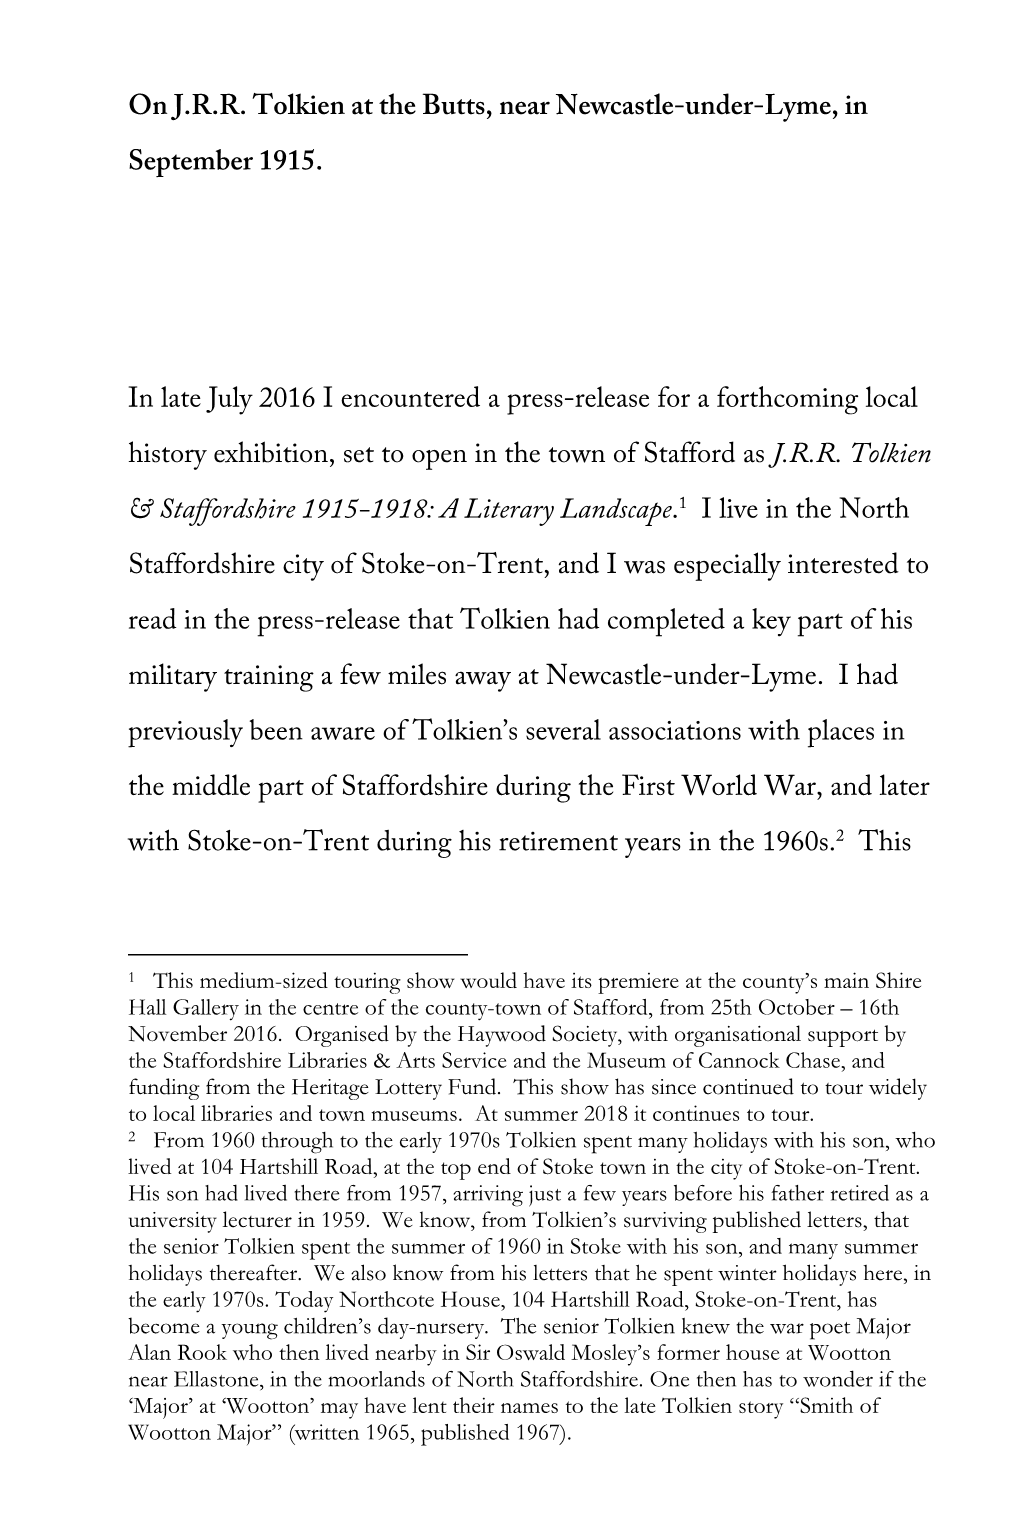 On J.R.R. Tolkien at the Butts, Near Newcastle-Under-Lyme, in September 1915